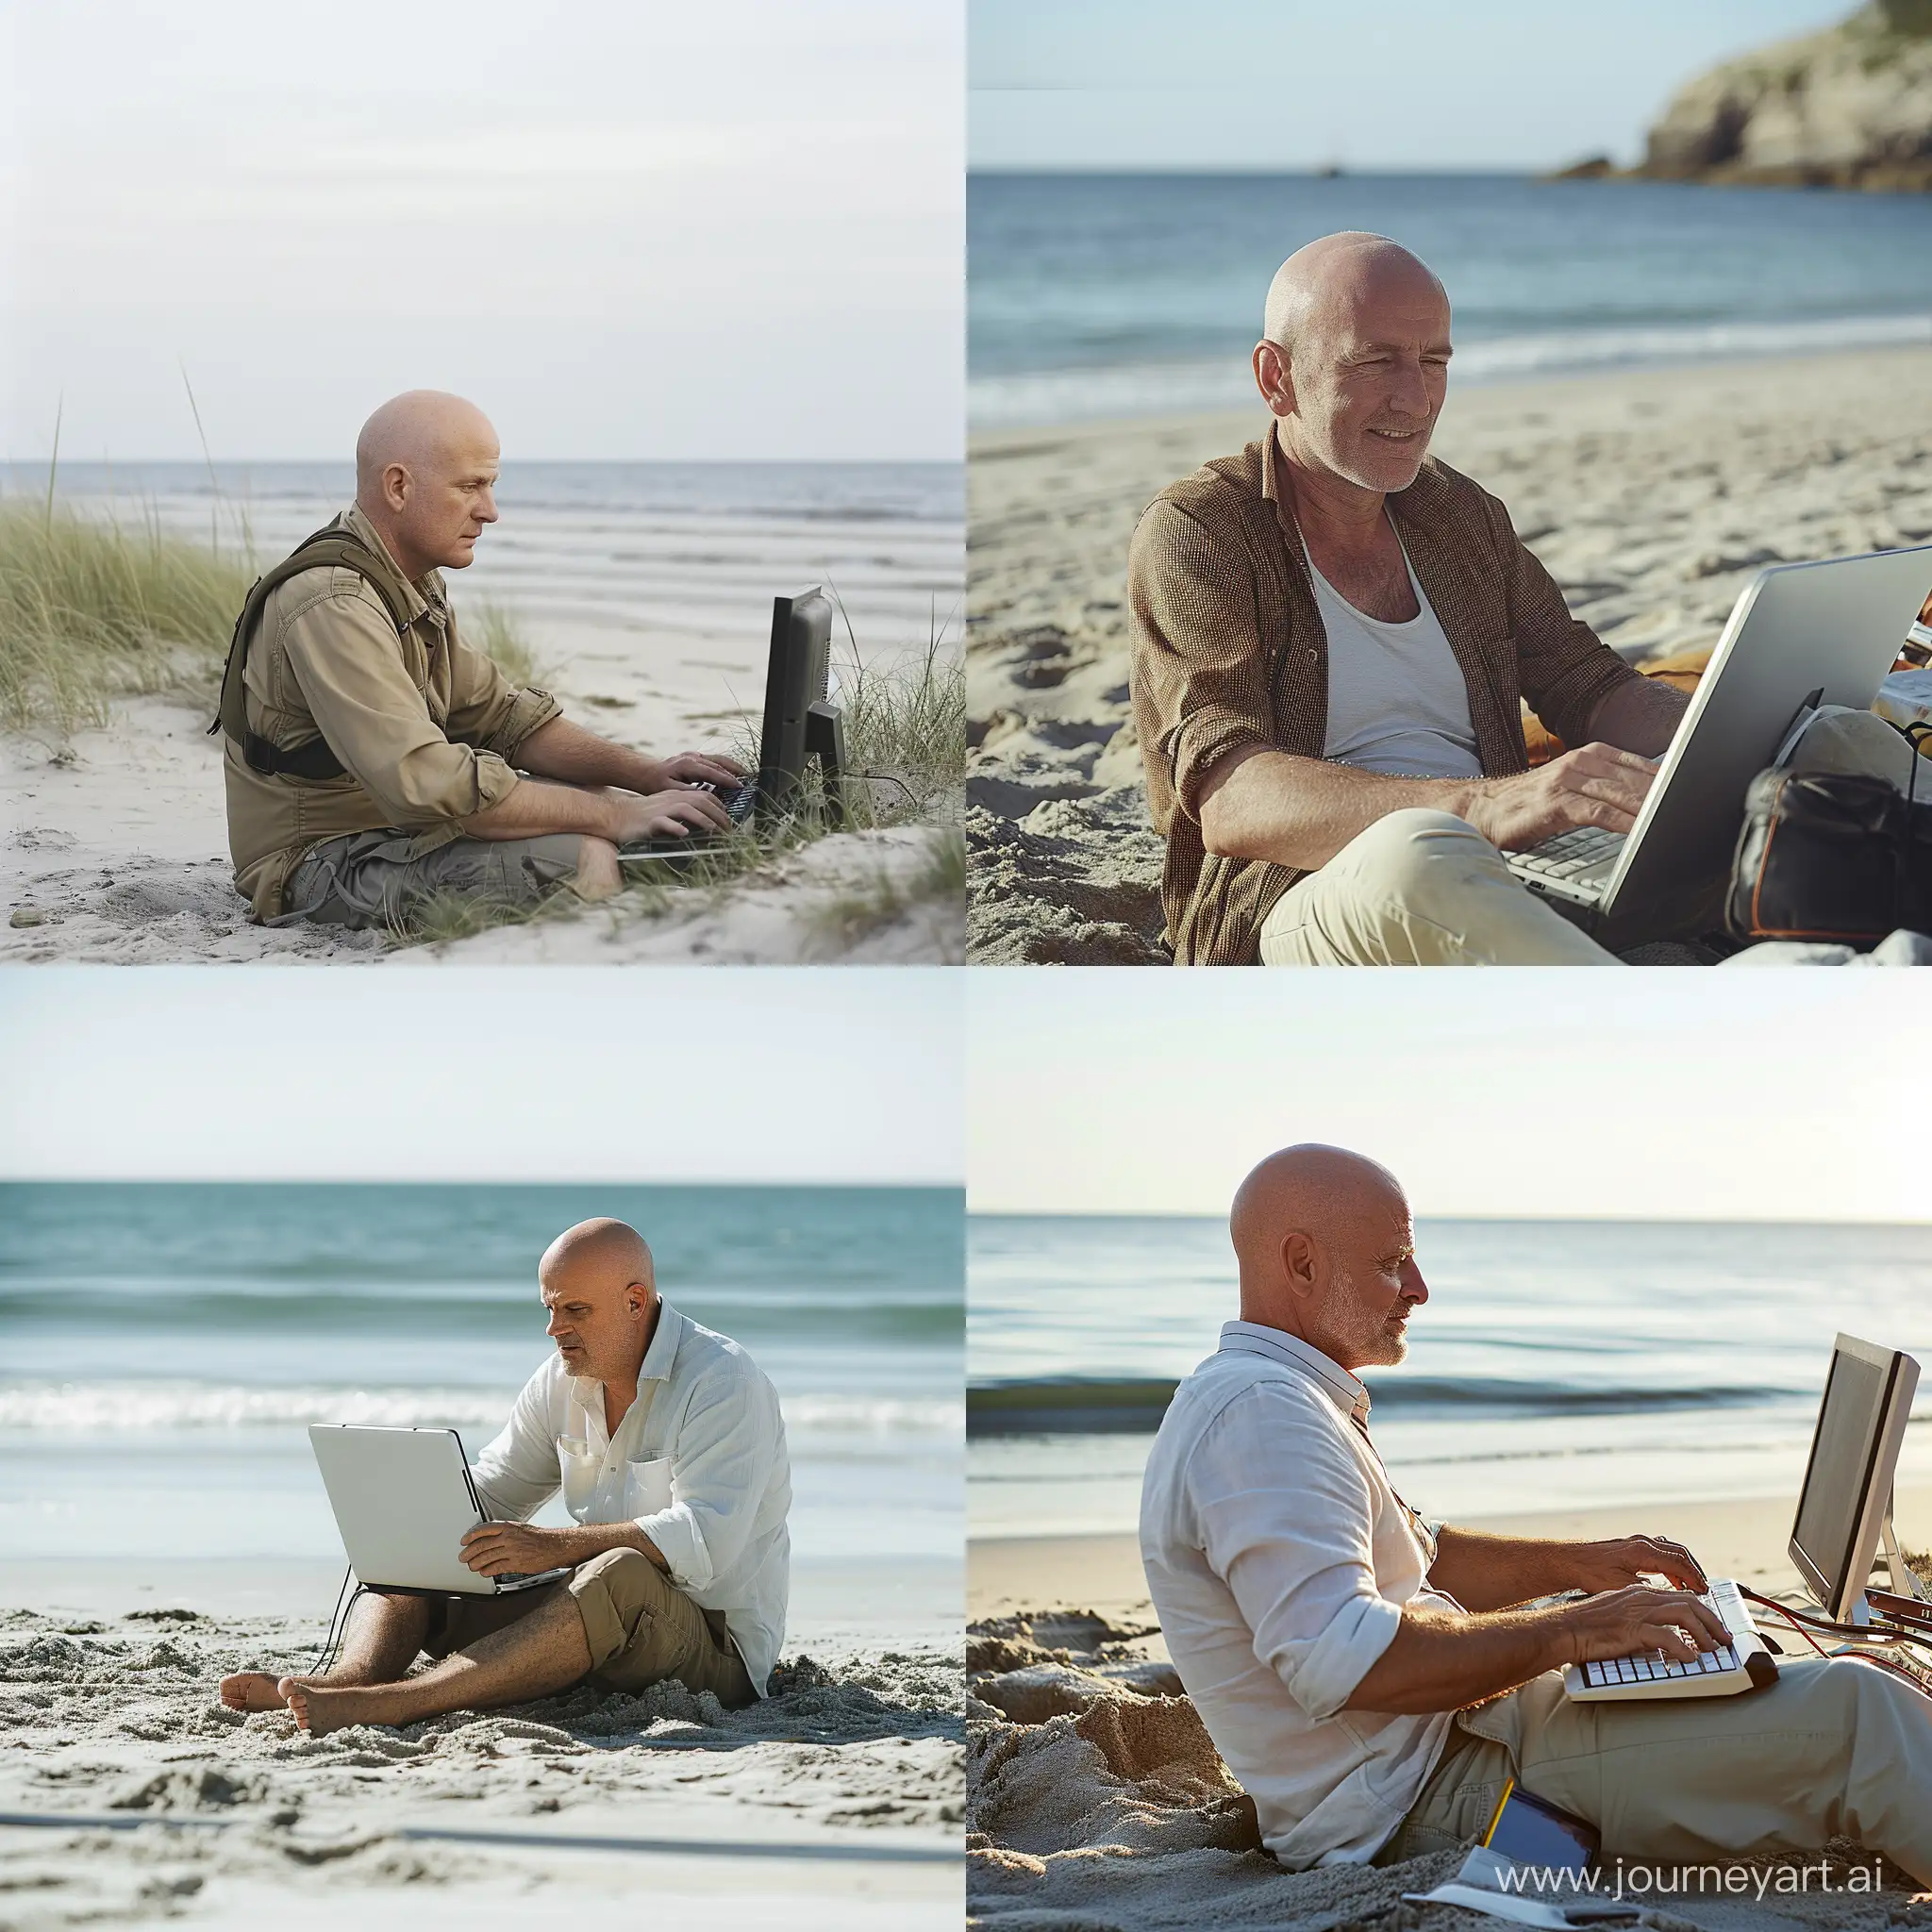 MiddleAged-Bald-Man-Working-on-Laptop-at-Beach